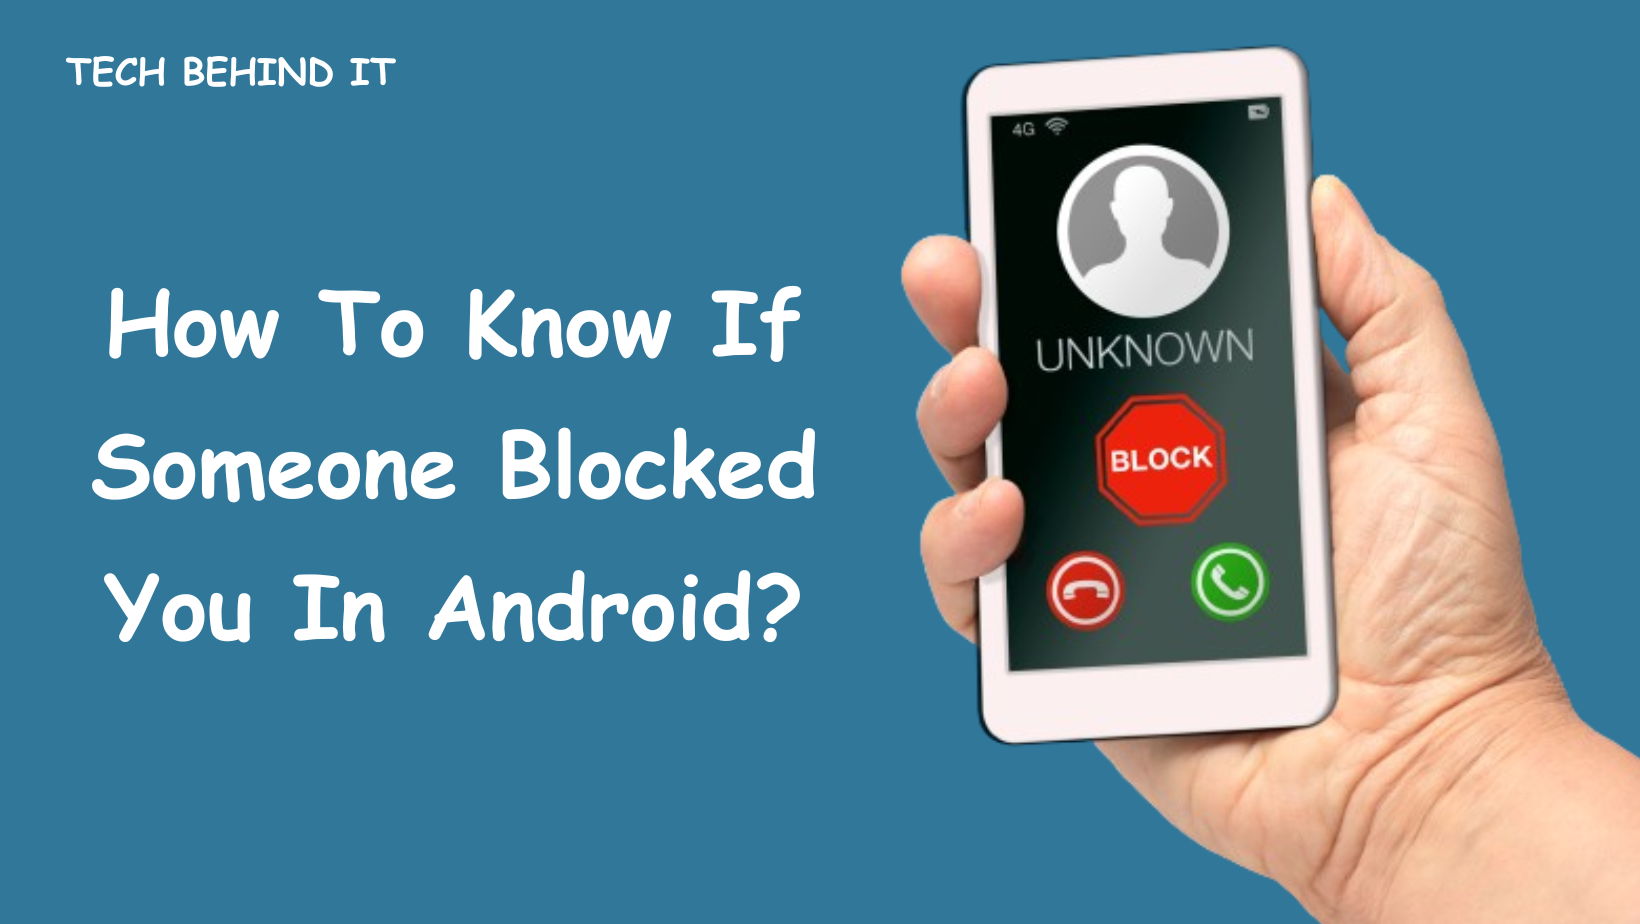 How To Know If Someone Blocked You In Android?